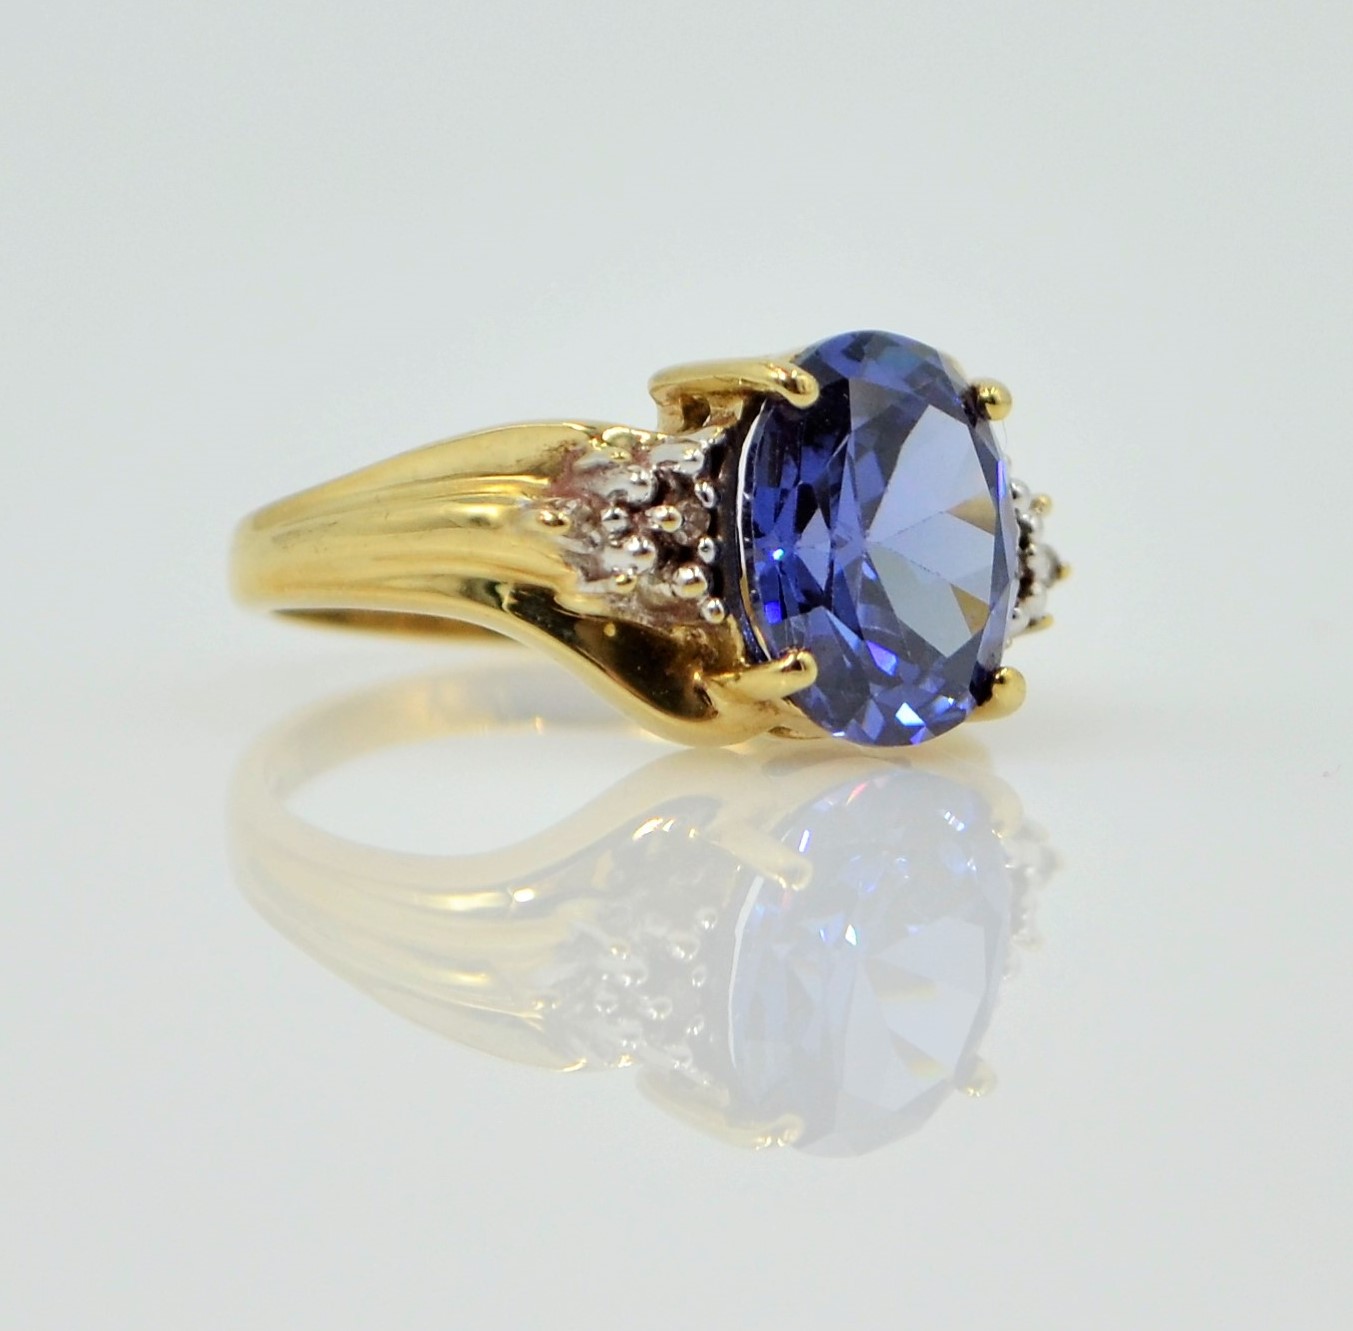 Gold dress ring set with a blue stone and diamond shoulders hallmarked 9ct Condition